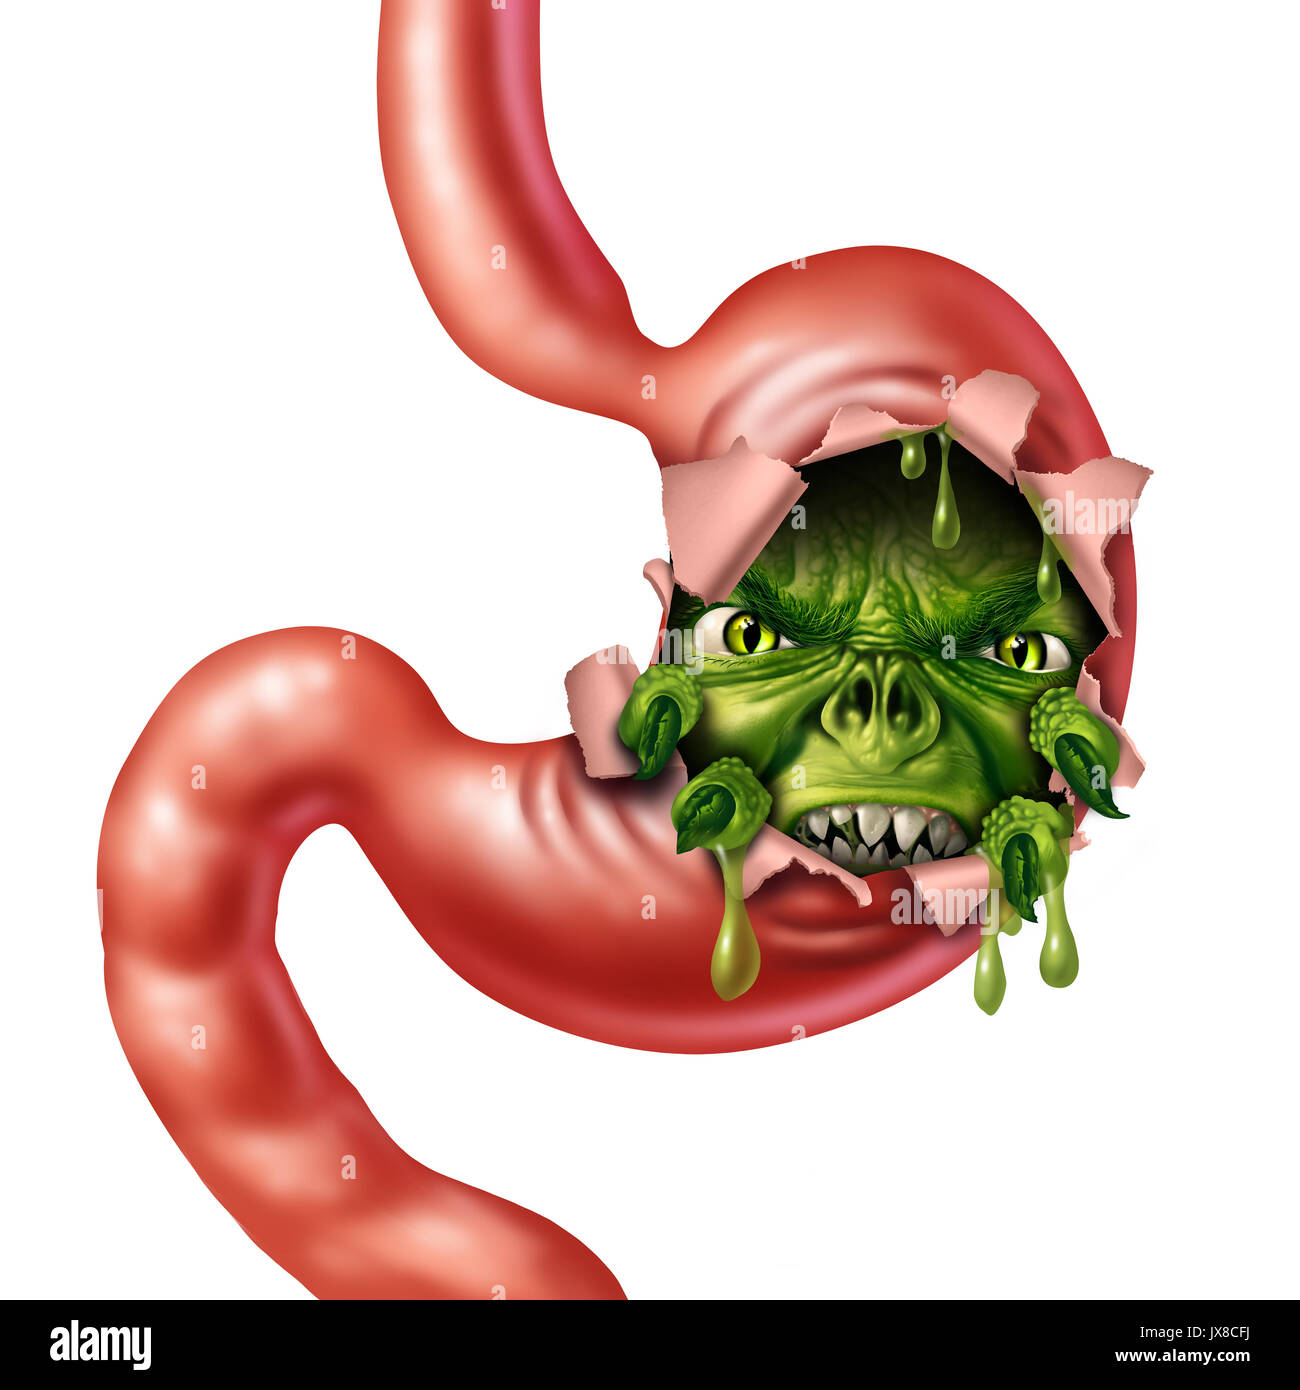 Upset stomach and nausea disease as an angry digestive organ character as a medical metaphor for indigestion and belly pain with gastric liquid. Stock Photo